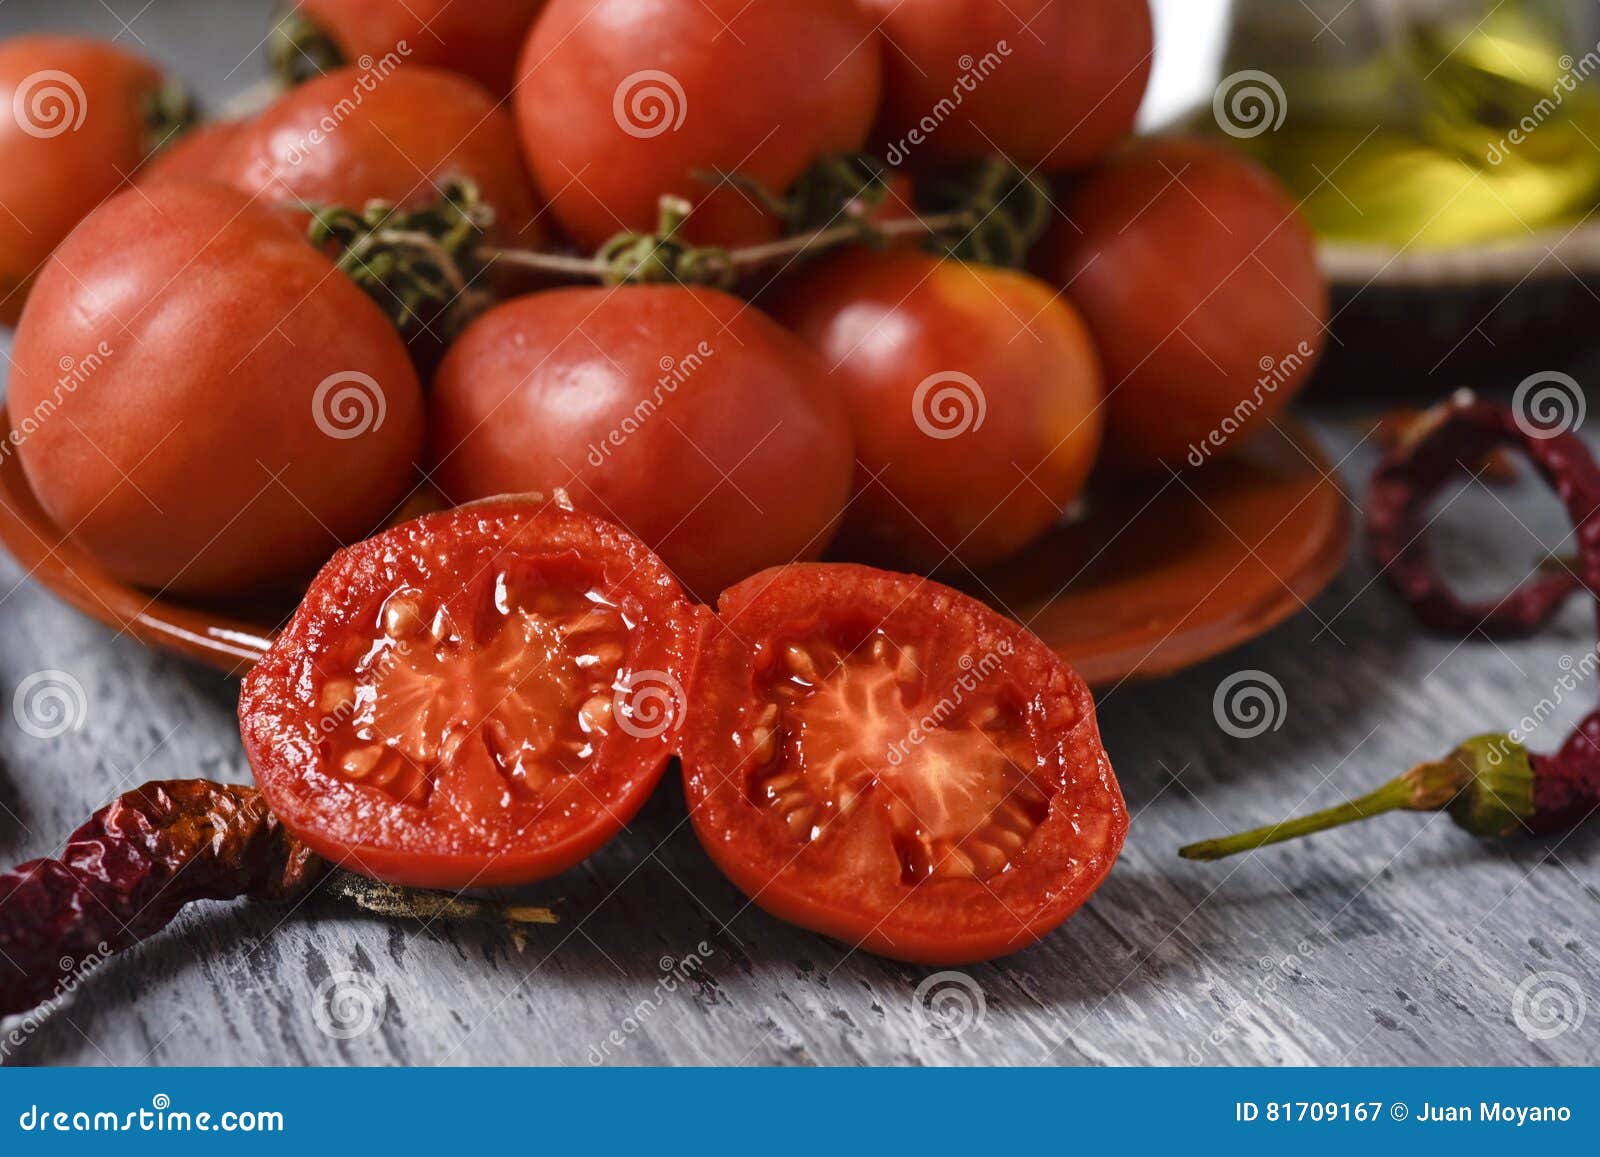 tomates de colgar, a typical spanish species of tomatoes